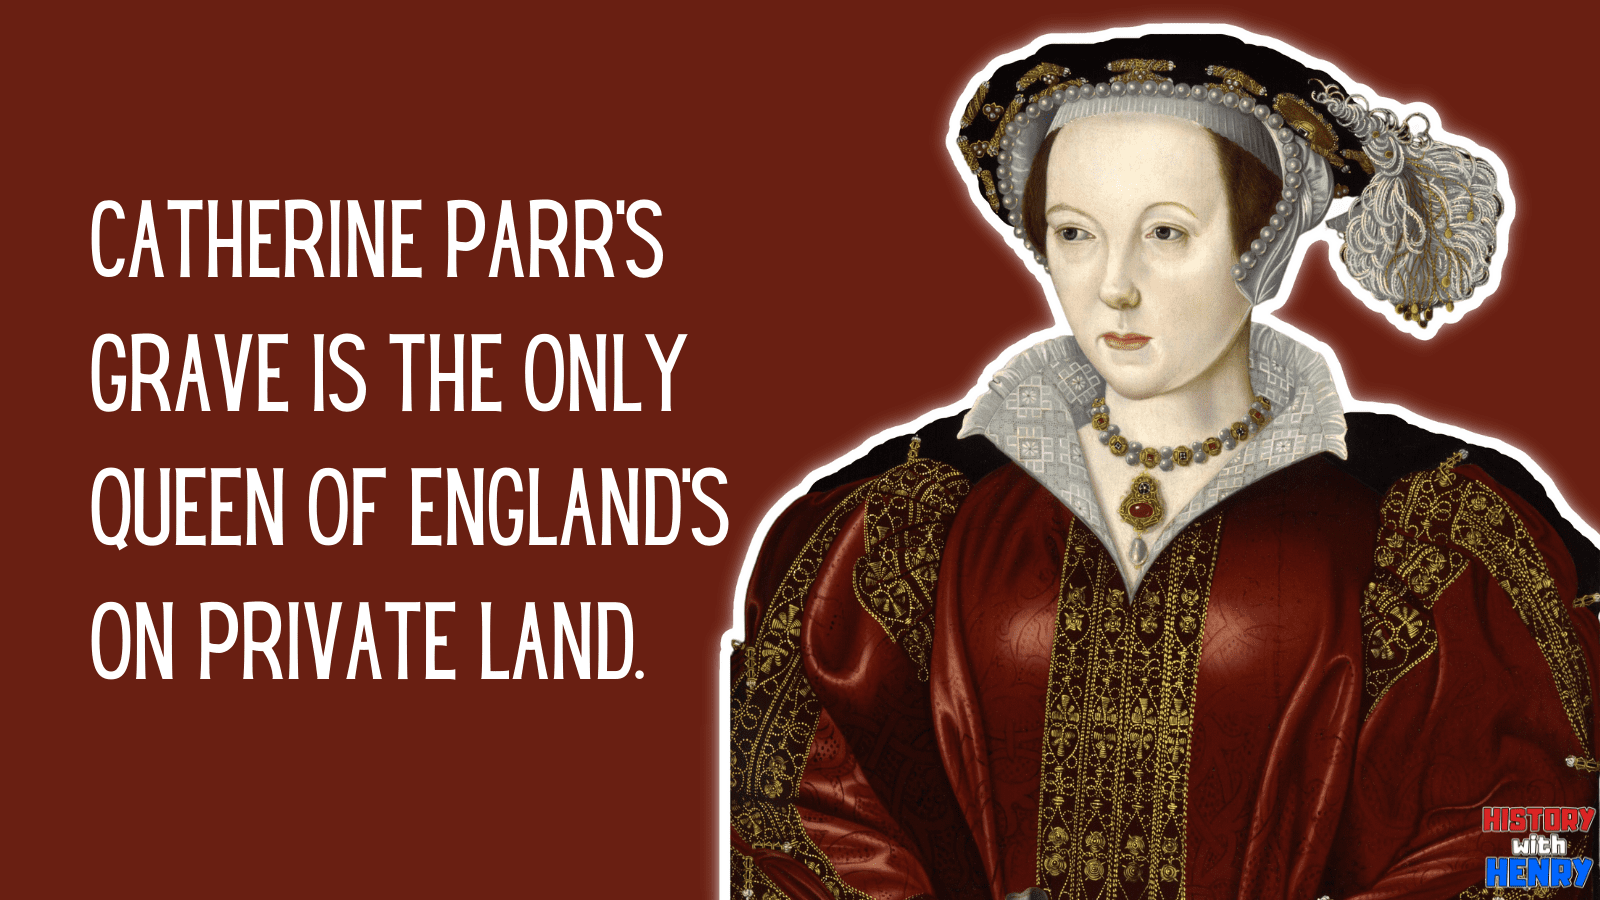 Facts about Catherine Parr